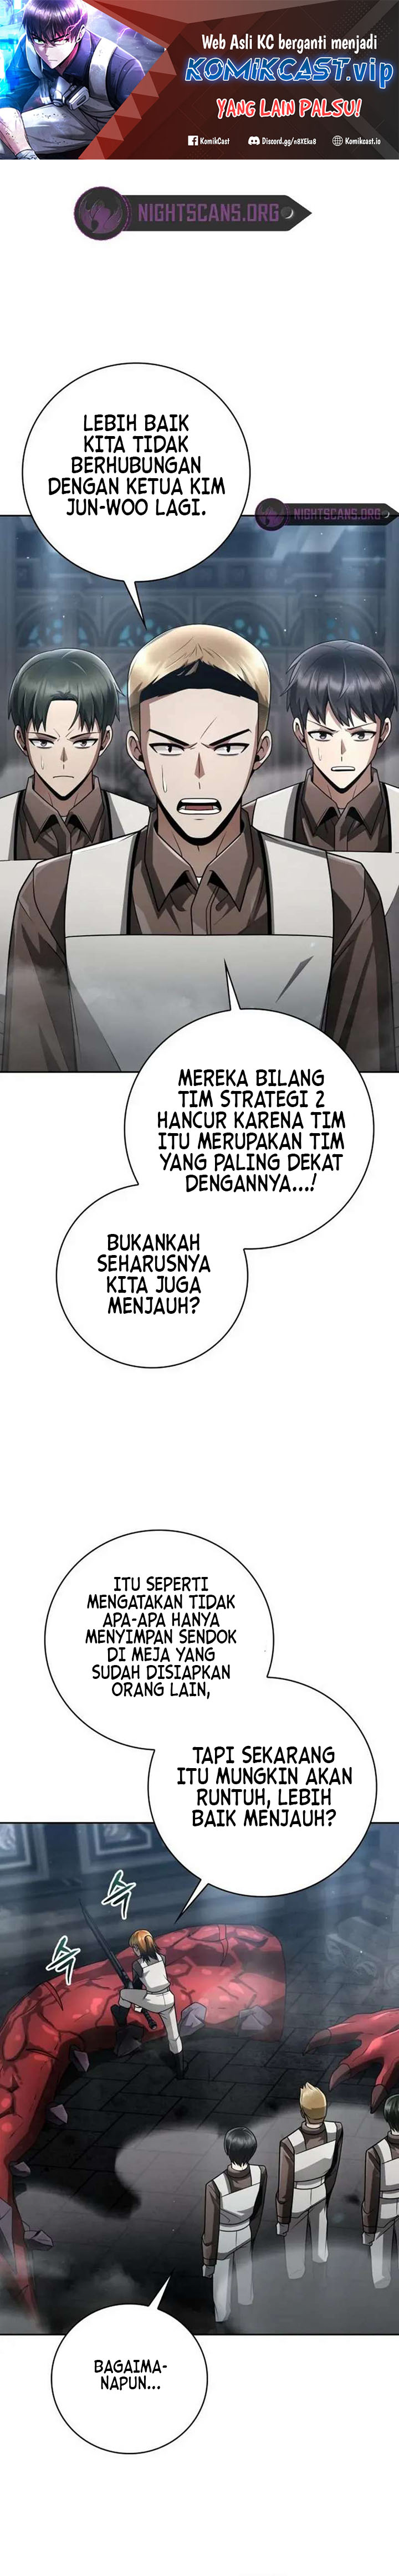 Dilarang COPAS - situs resmi www.mangacanblog.com - Komik clever cleaning life of the returned genius hunter 042 - chapter 42 43 Indonesia clever cleaning life of the returned genius hunter 042 - chapter 42 Terbaru 1|Baca Manga Komik Indonesia|Mangacan